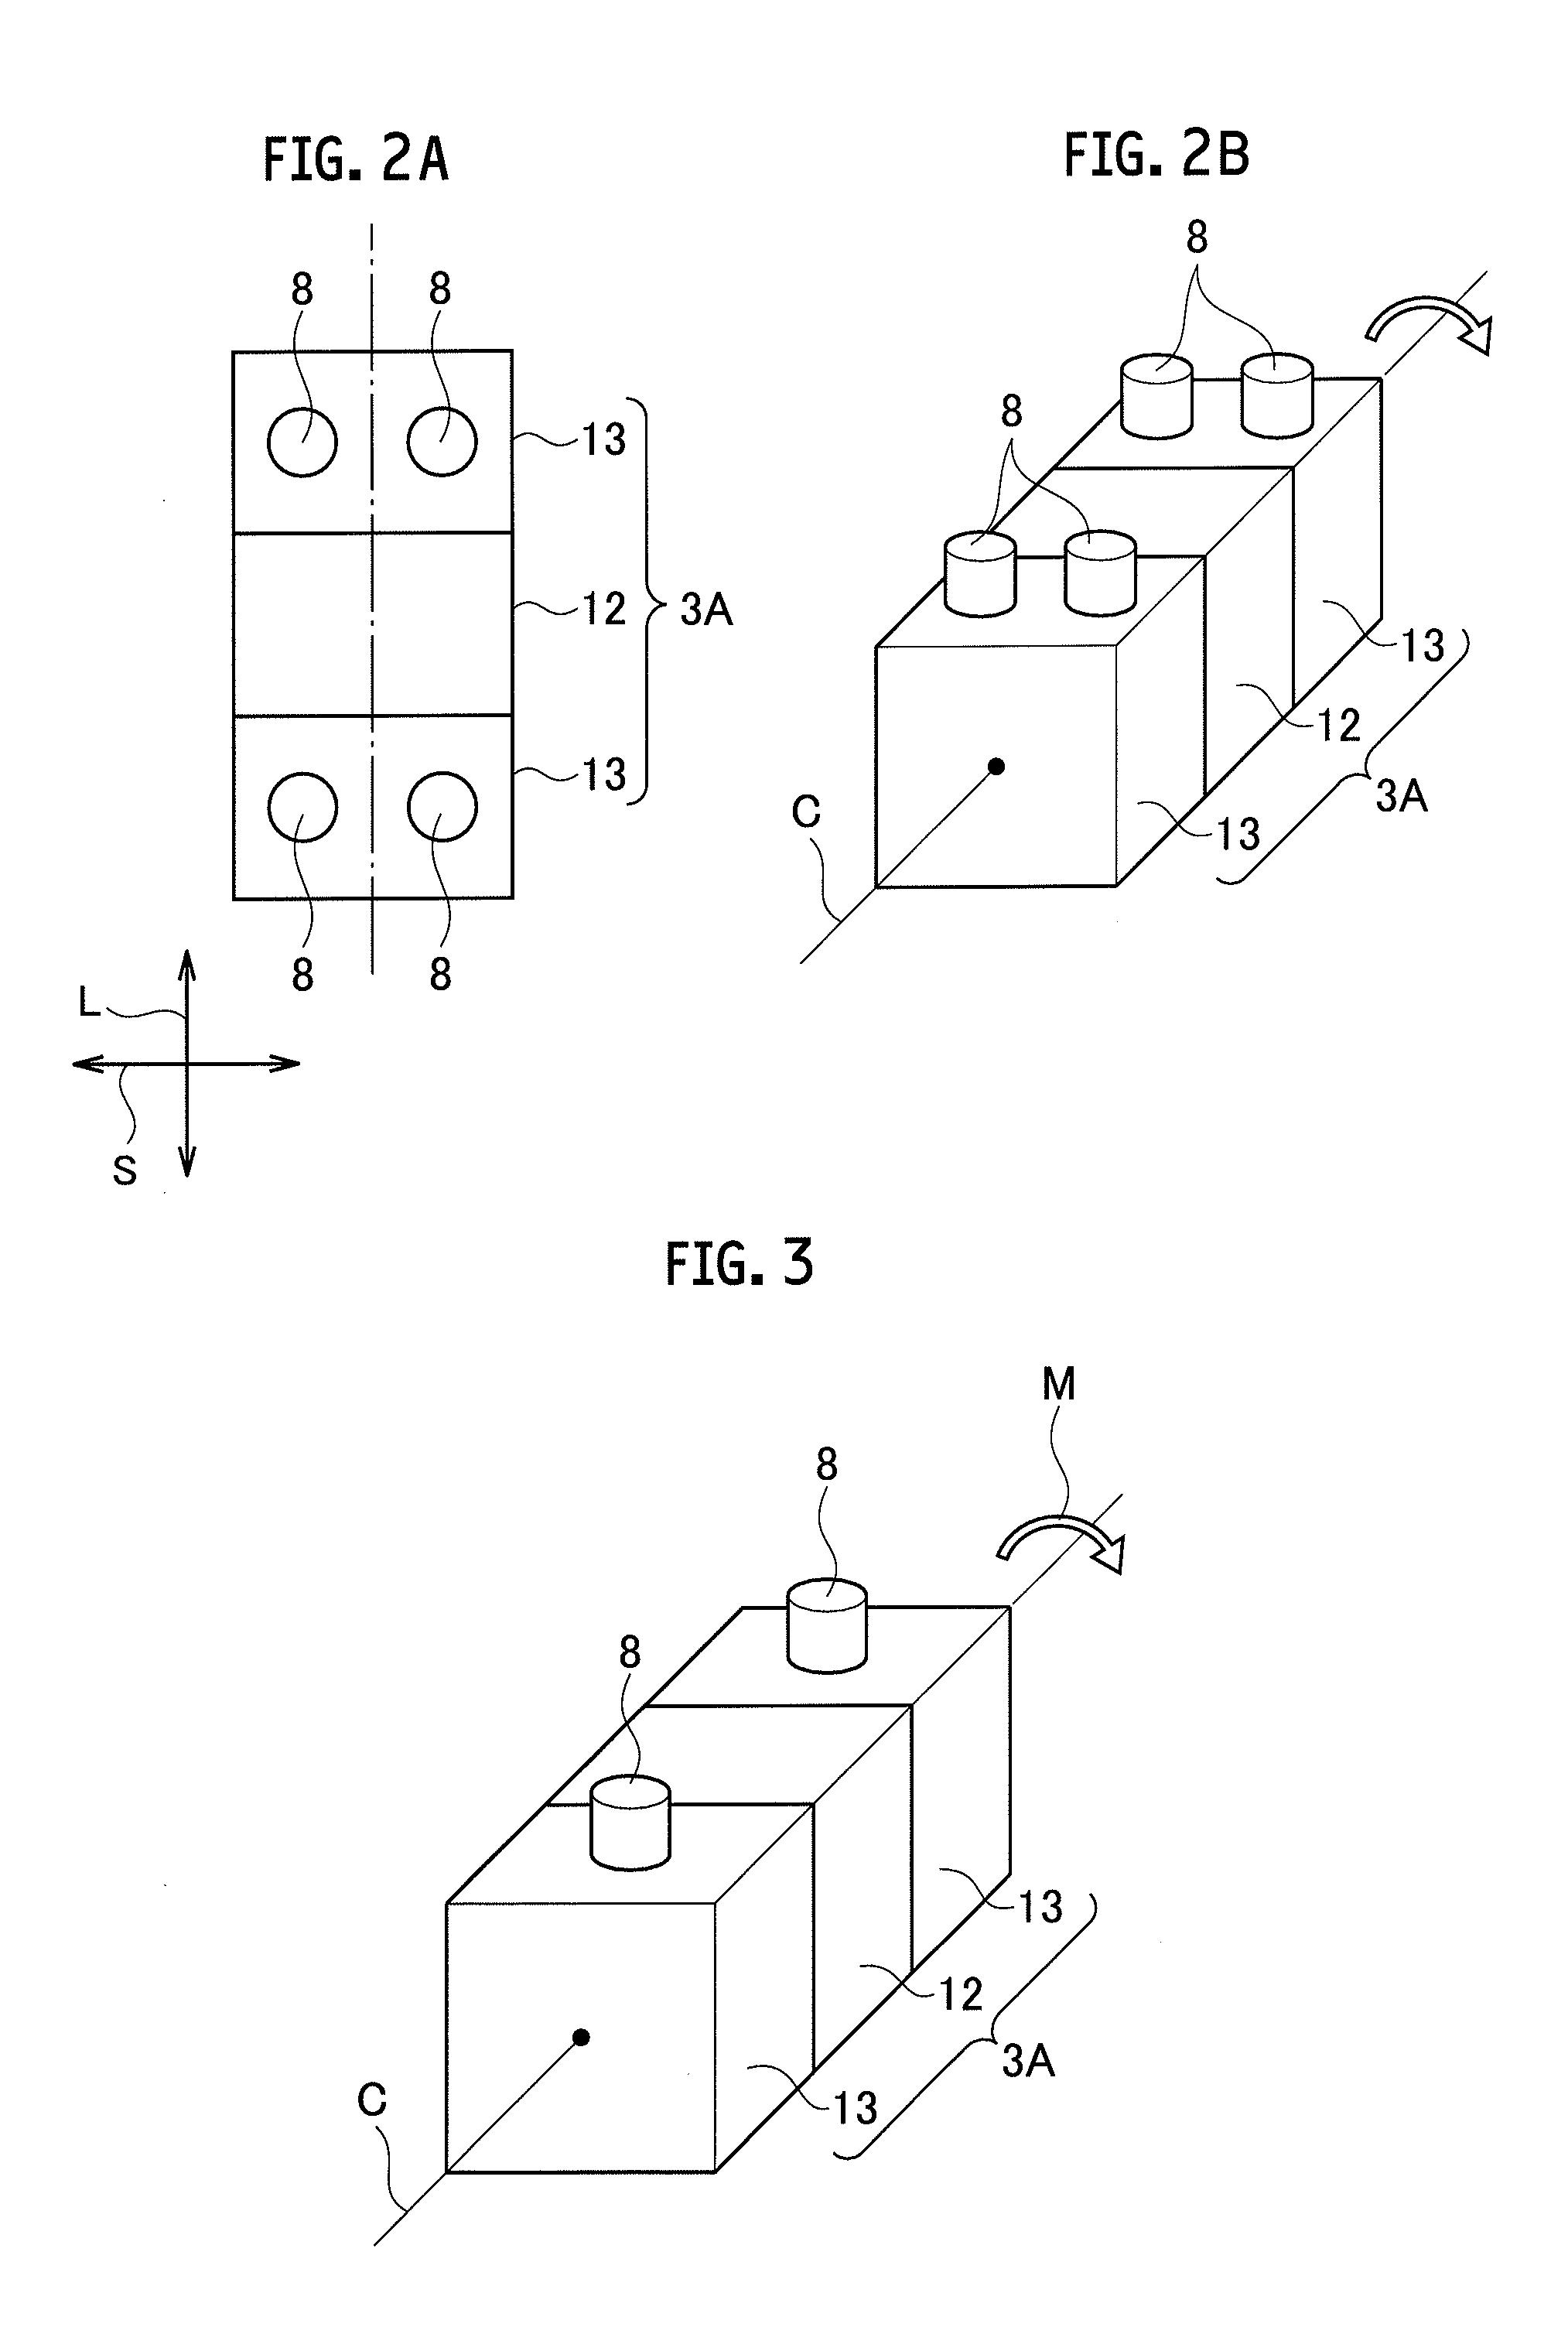 Laminated wiring board and manufacturing method for same